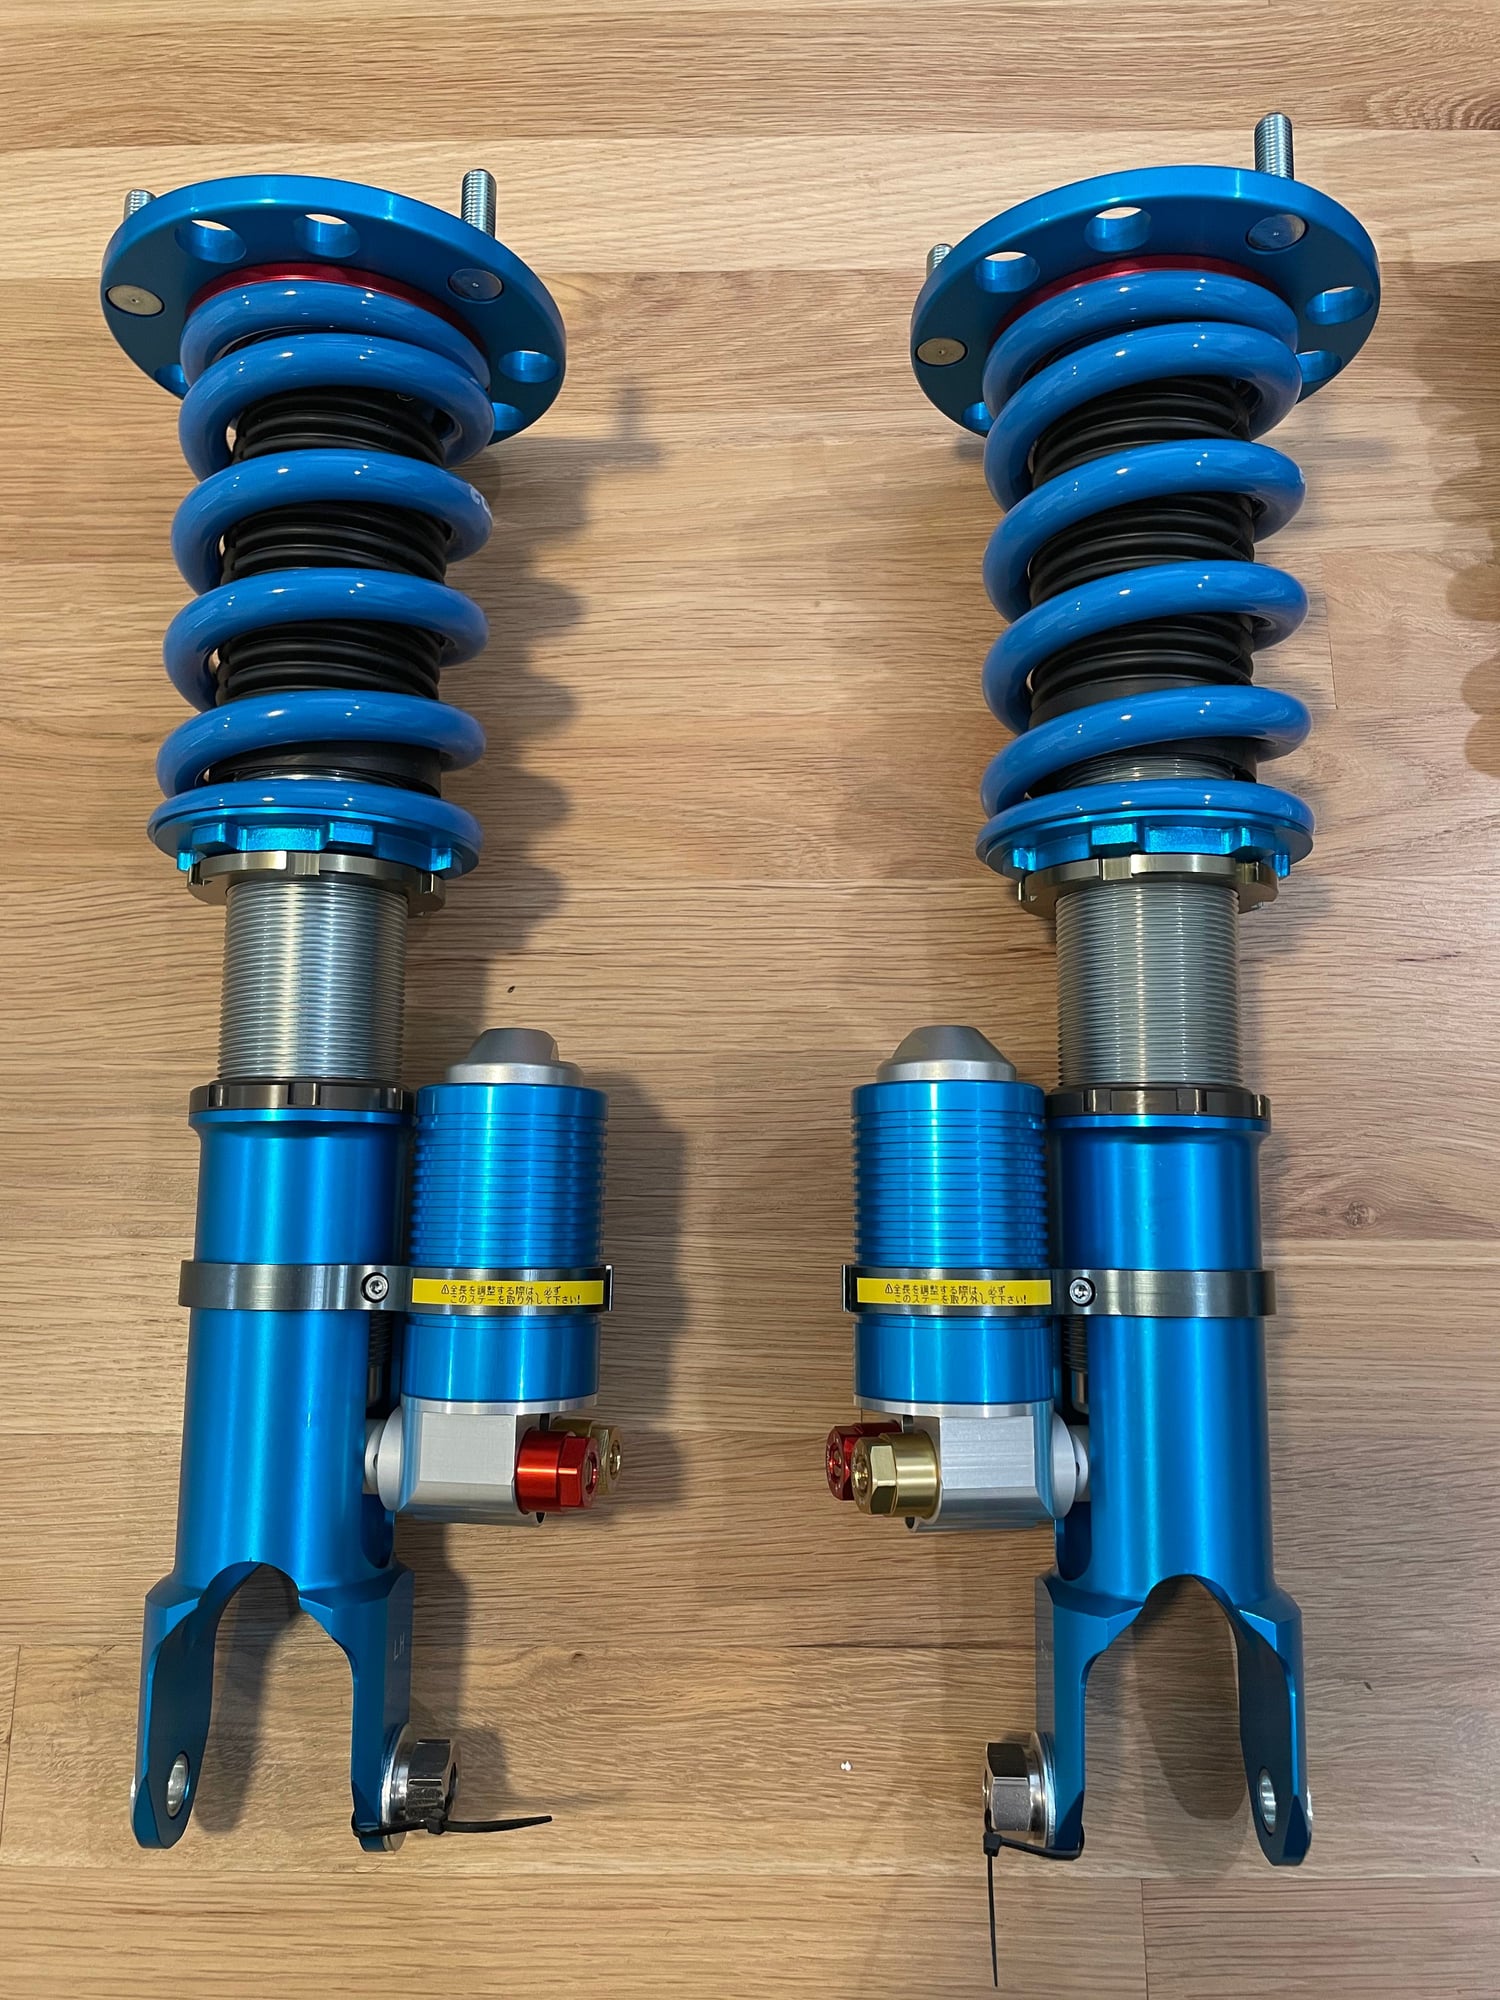 Accessories - Cusco Sport X 3 way external reservoir coilover for FD3S RX7 RX-7 Brand New - New - 1992 to 2002 Mazda RX-7 - Torrance, CA 90505, United States